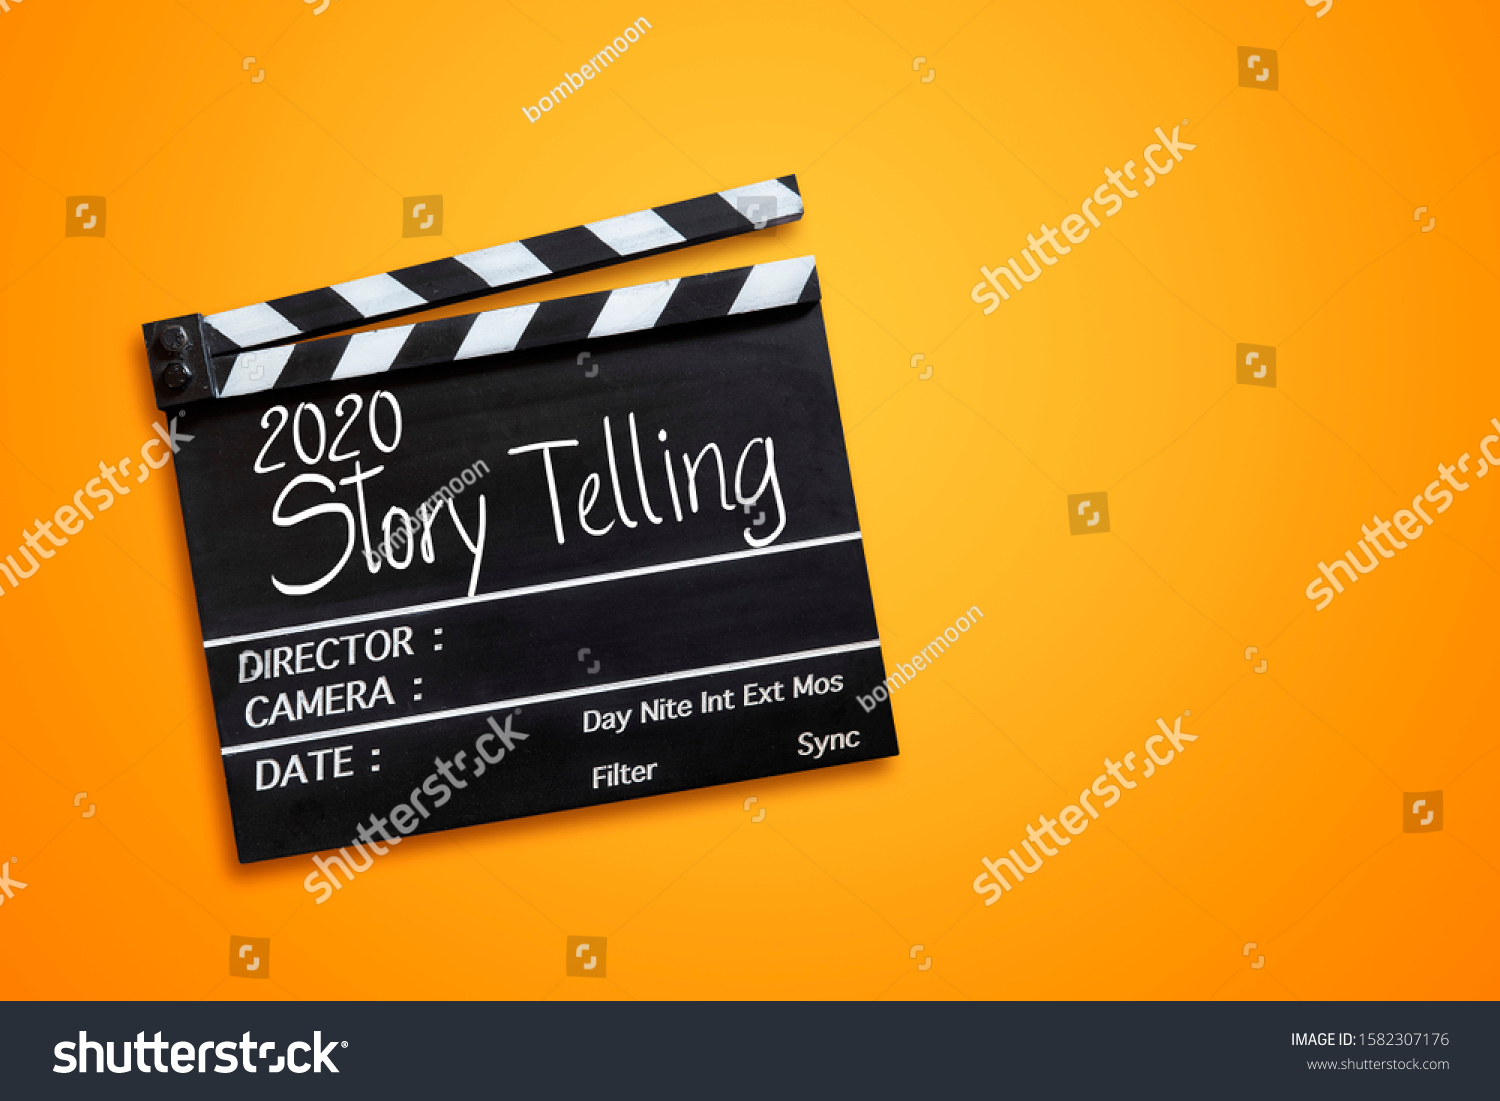 years 2020 story telling text title on film slate #1582307176